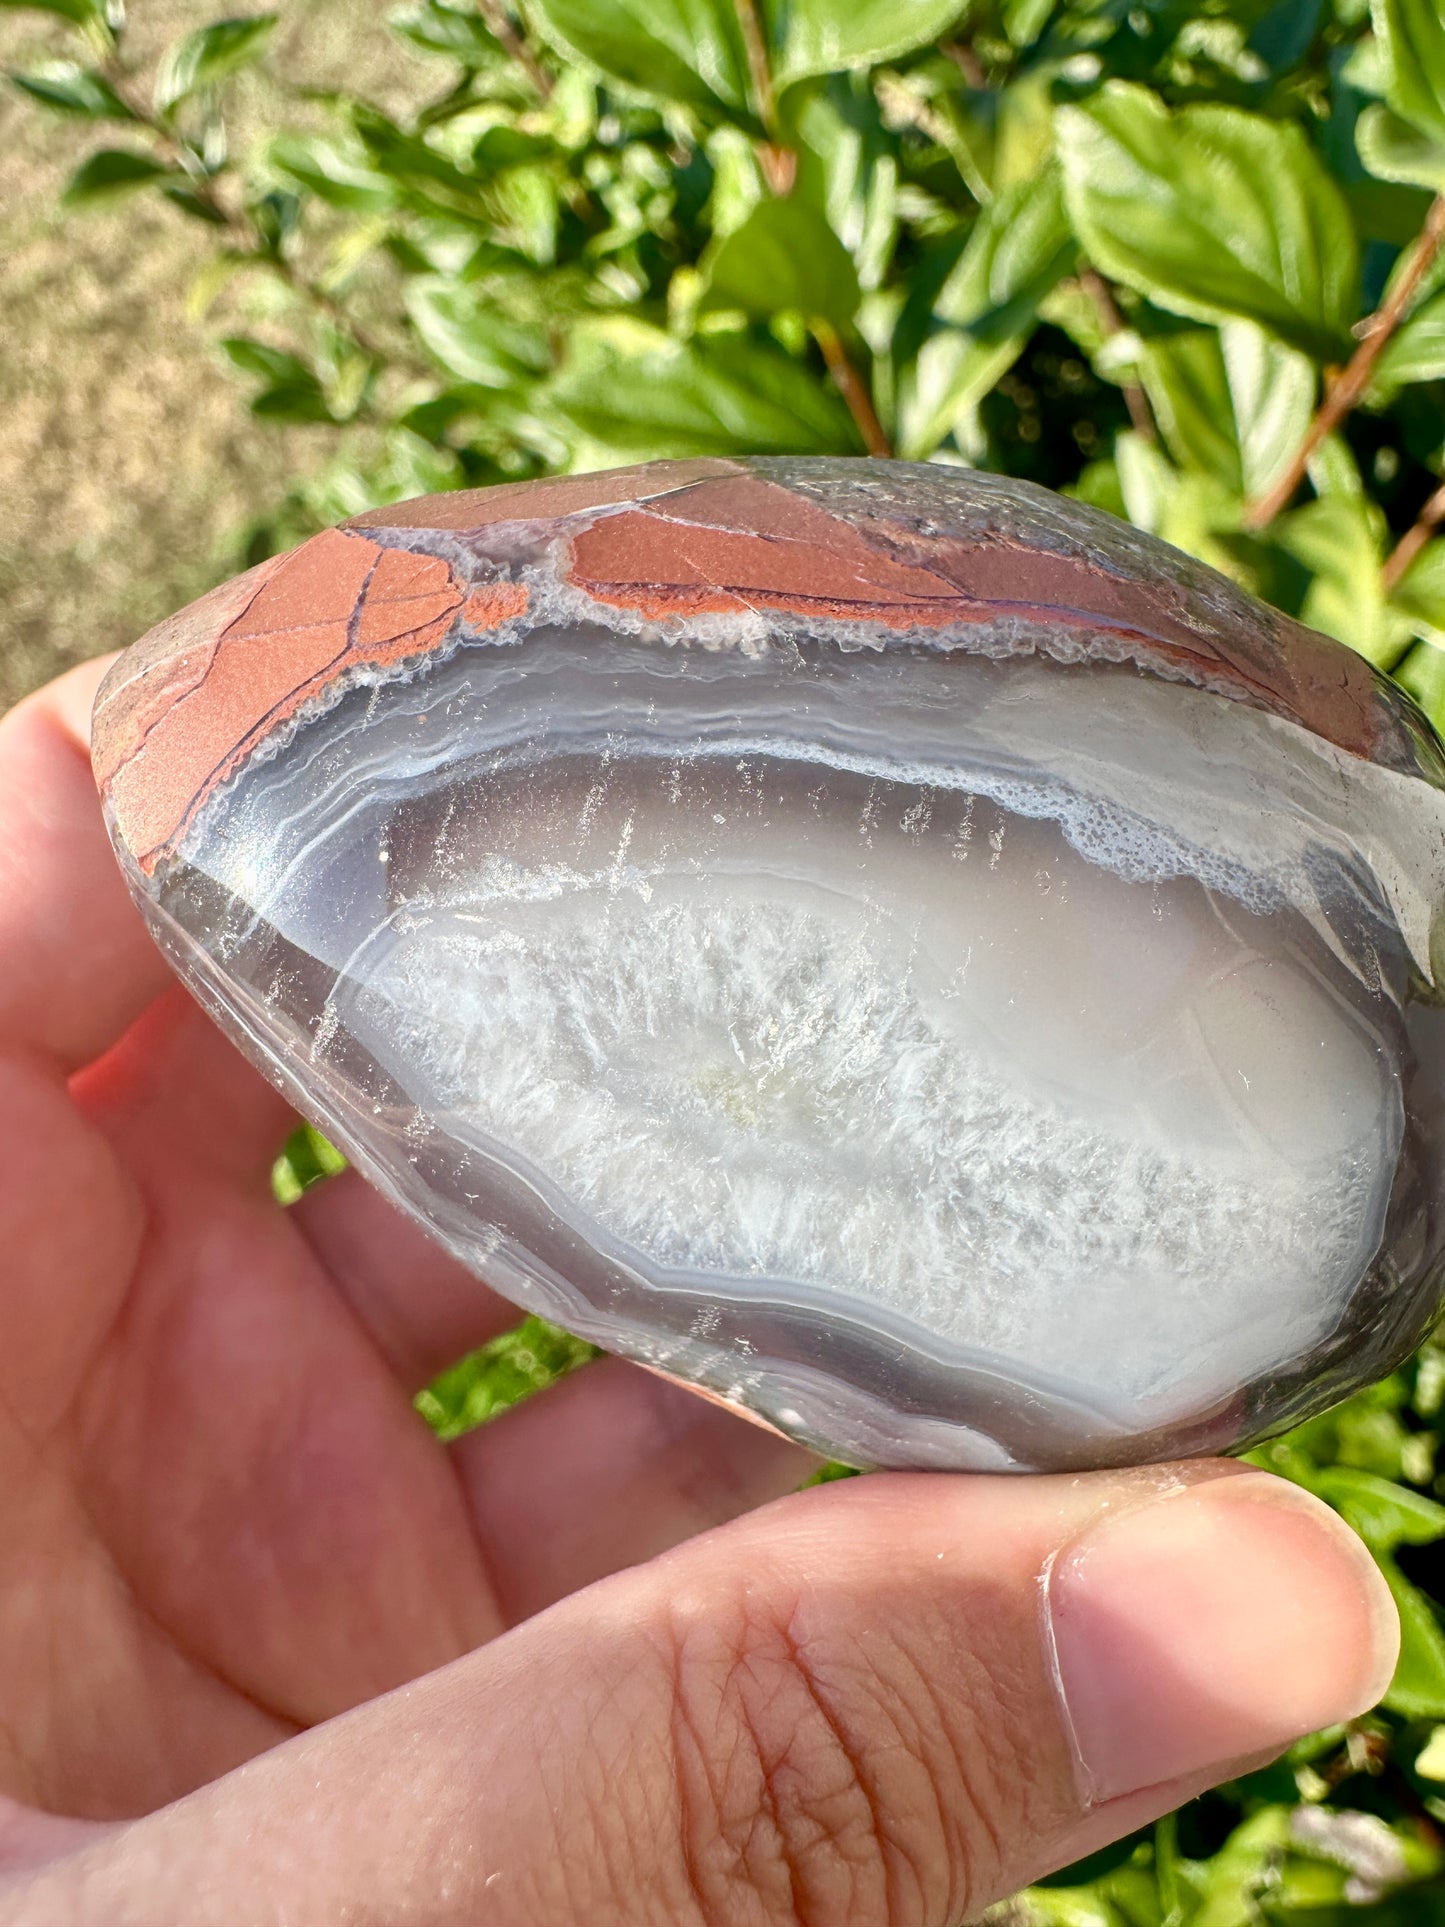 Handcrafted Football Agate Egg Shape, Unique Natural Stone Decor, Elegant Home Decoration, Sports-Themed Sculpture, Gift for Sports Fans, Desk Ornament